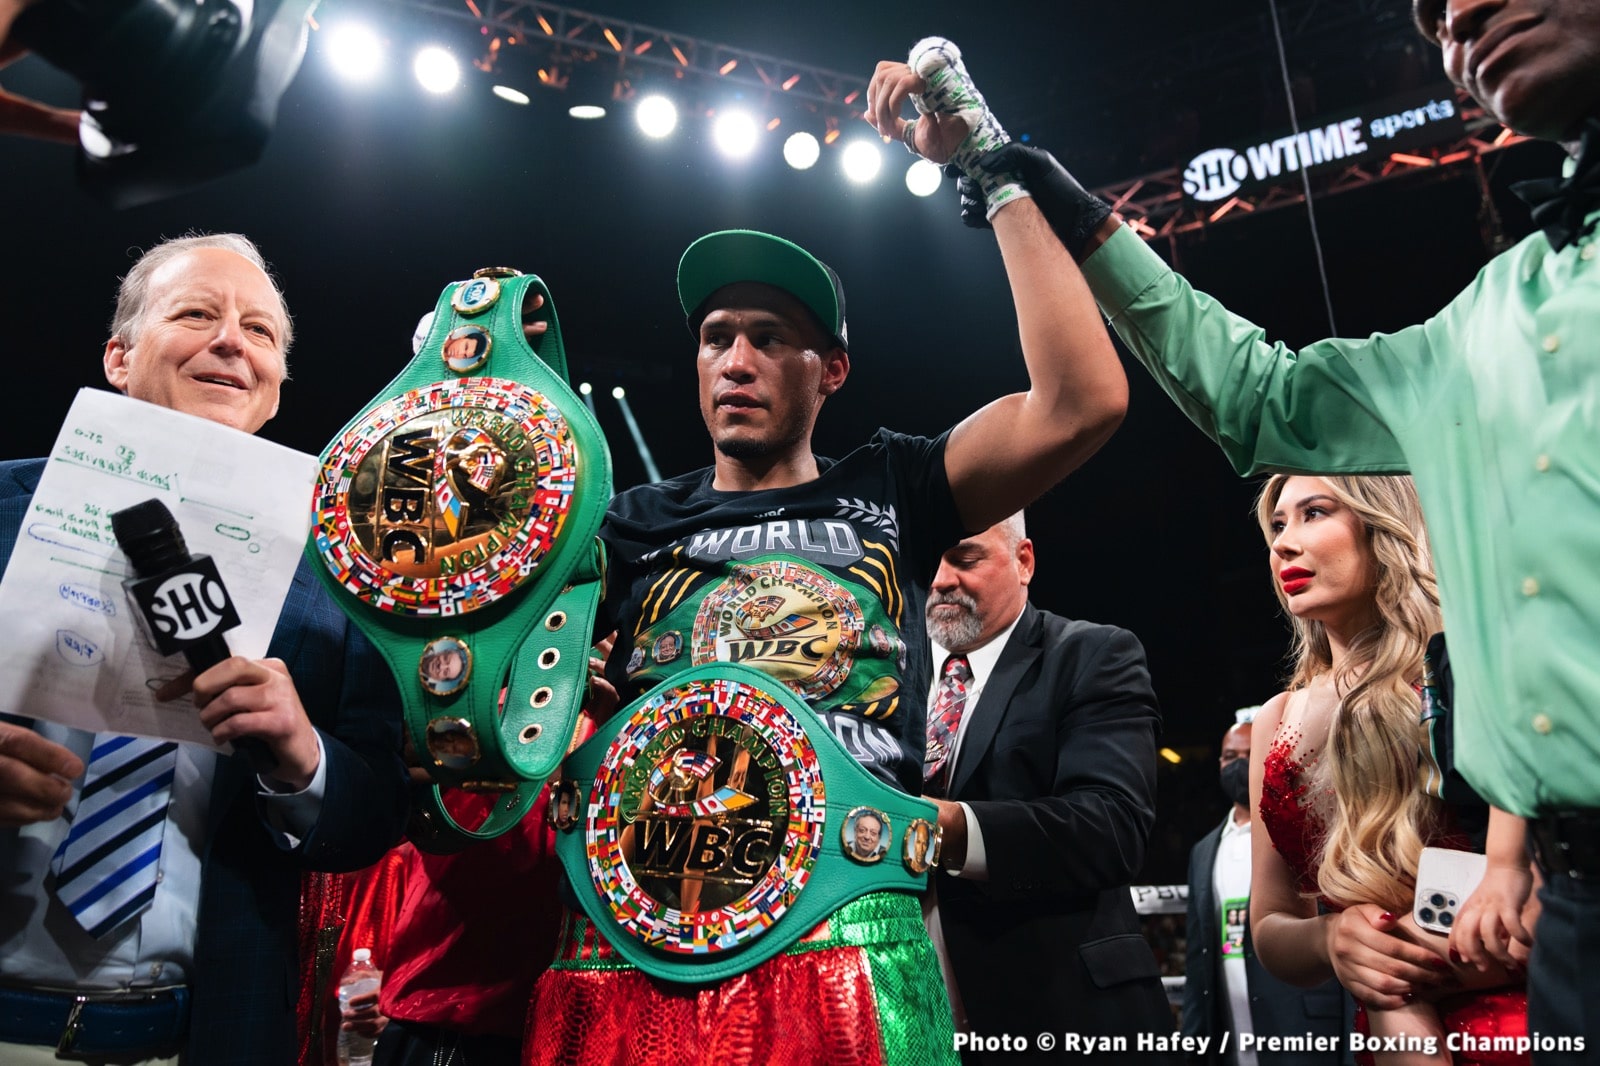 Image: David Benavidez can earn Canelo fight by defeating Caleb Plant on March 25th